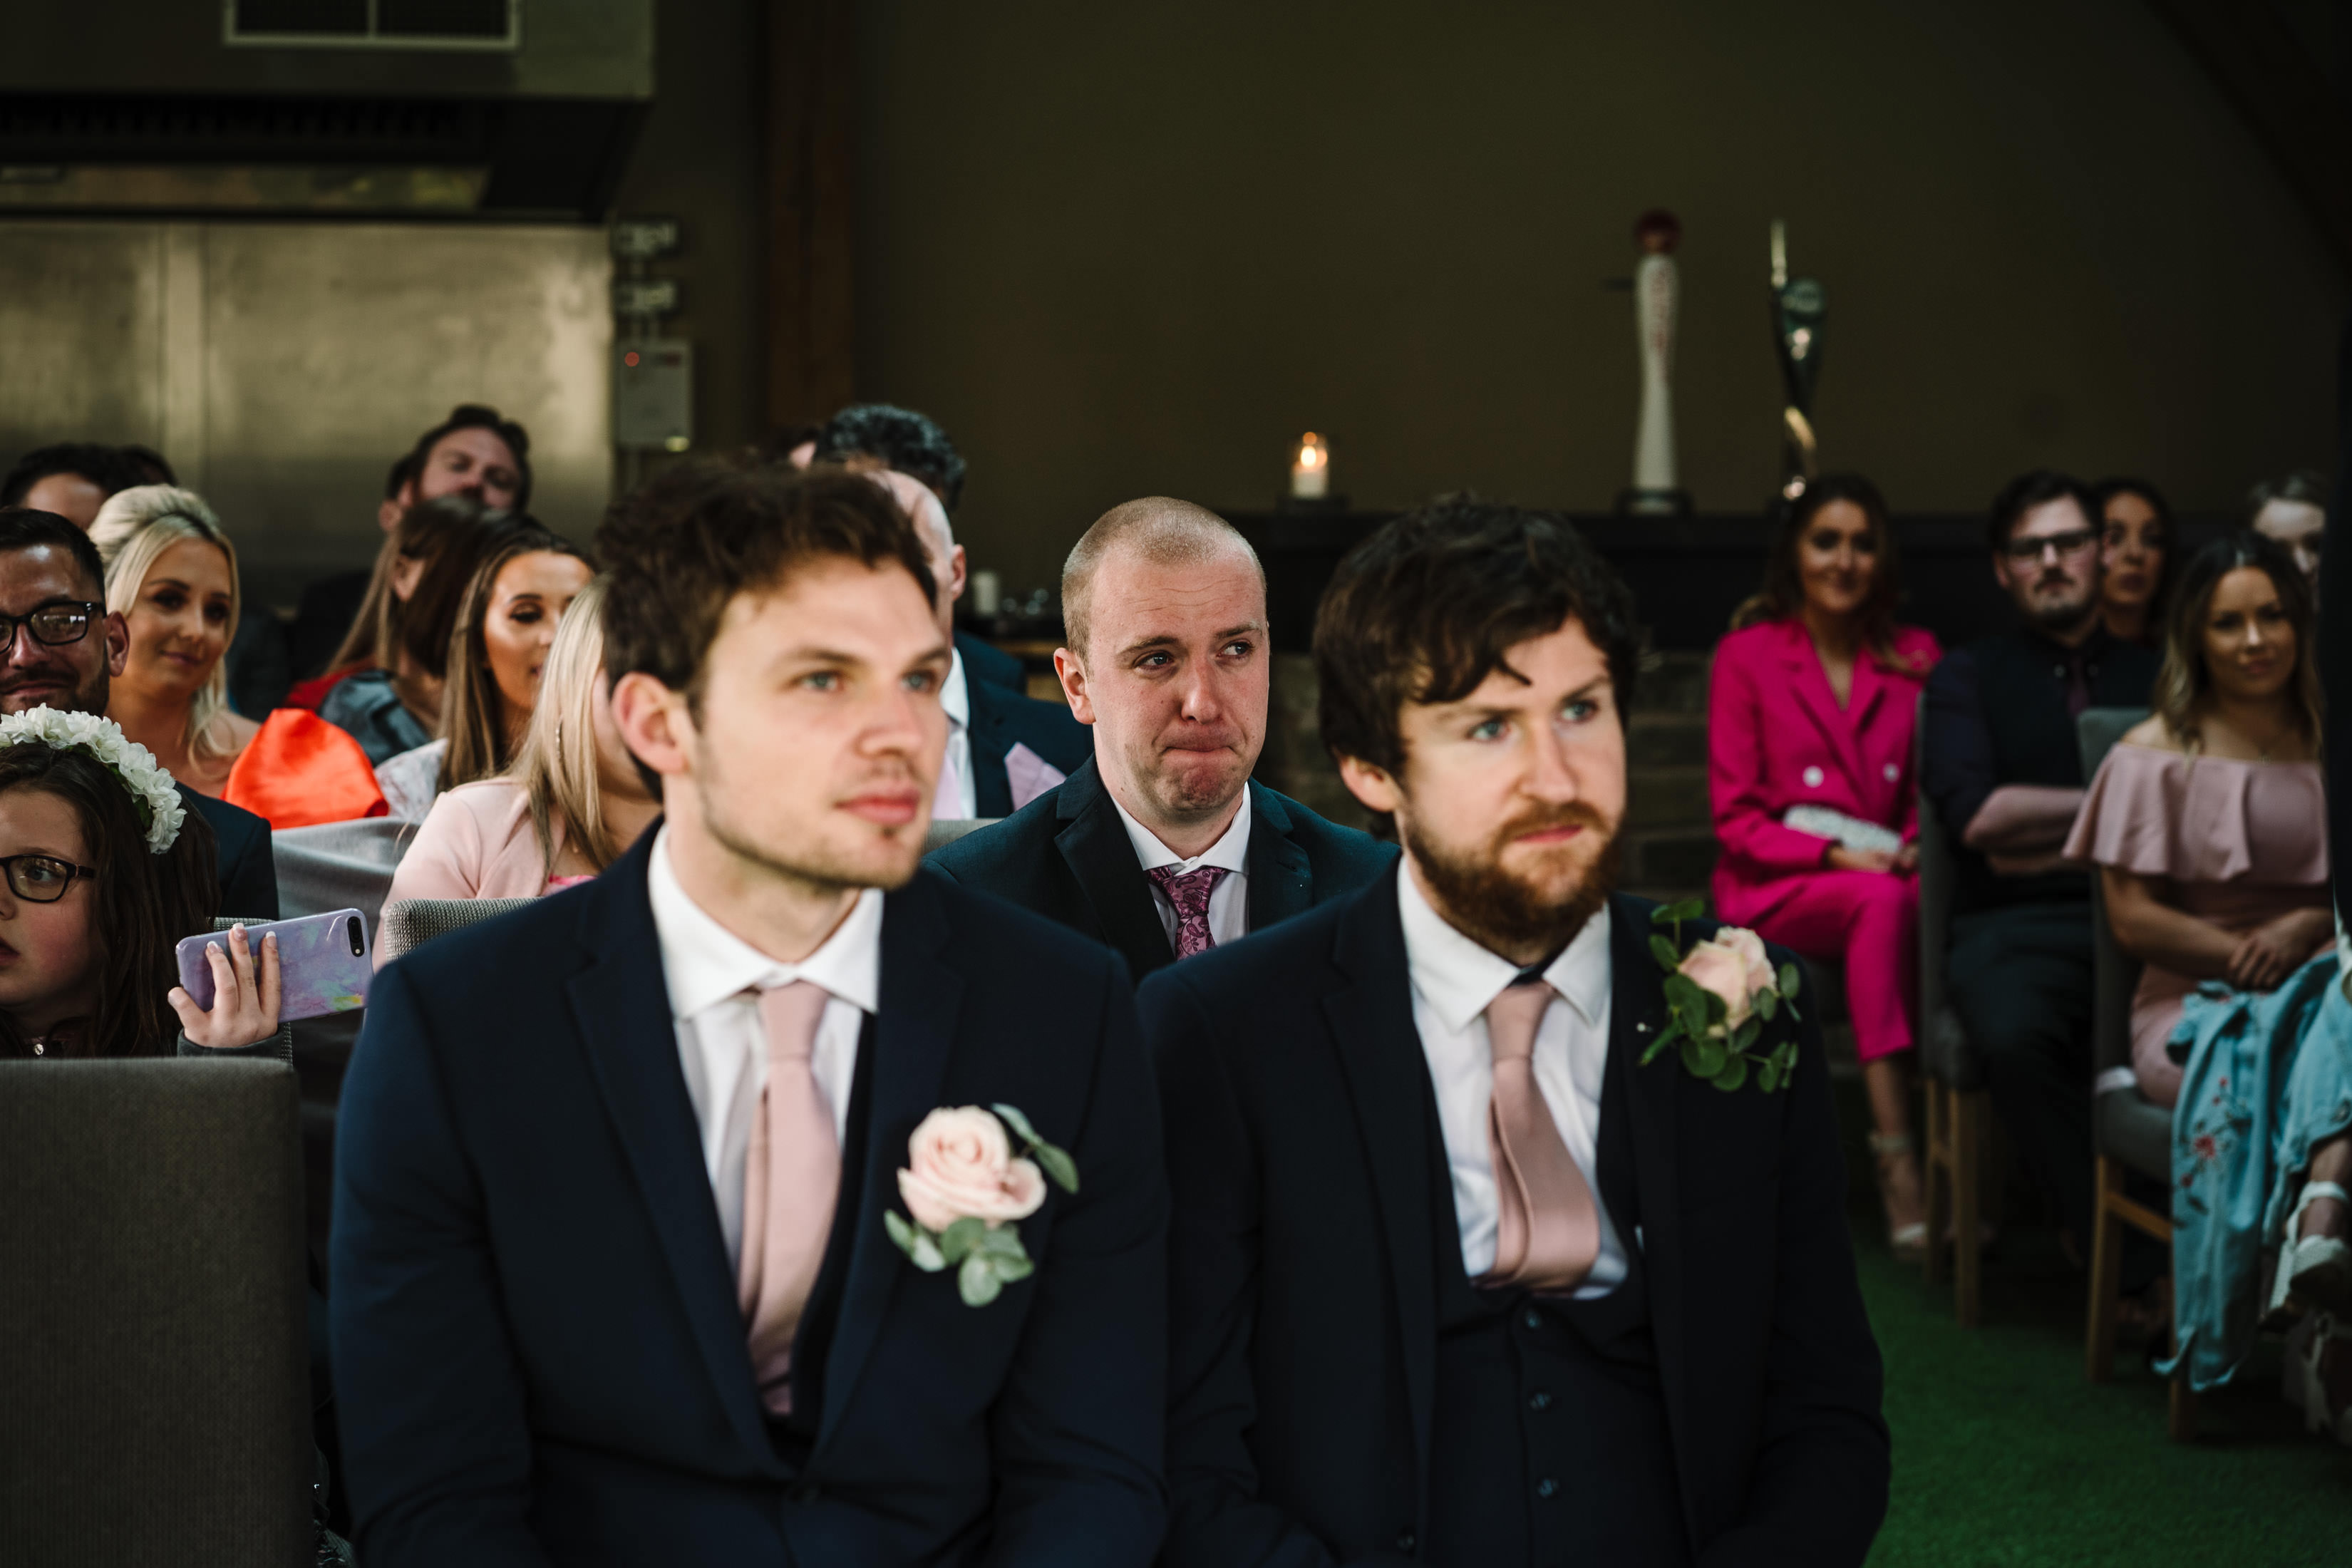 Brother of the bride emotional during wedding ceremony